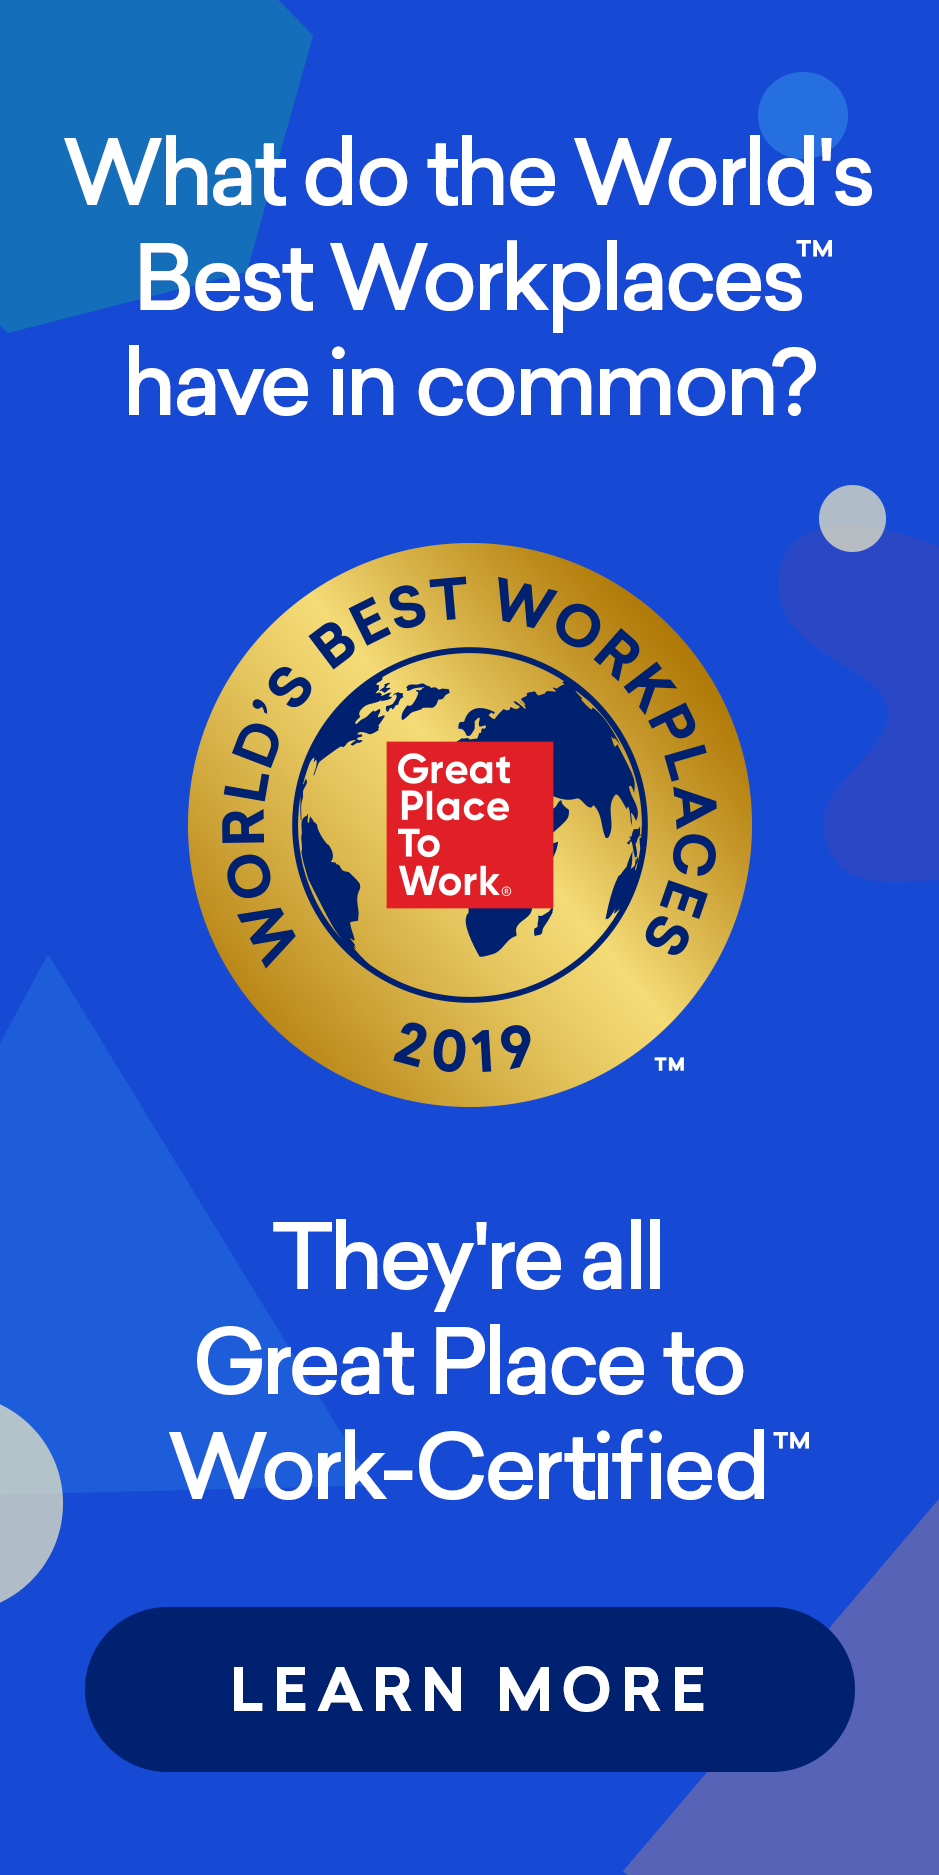 World's Best Workplaces 2019